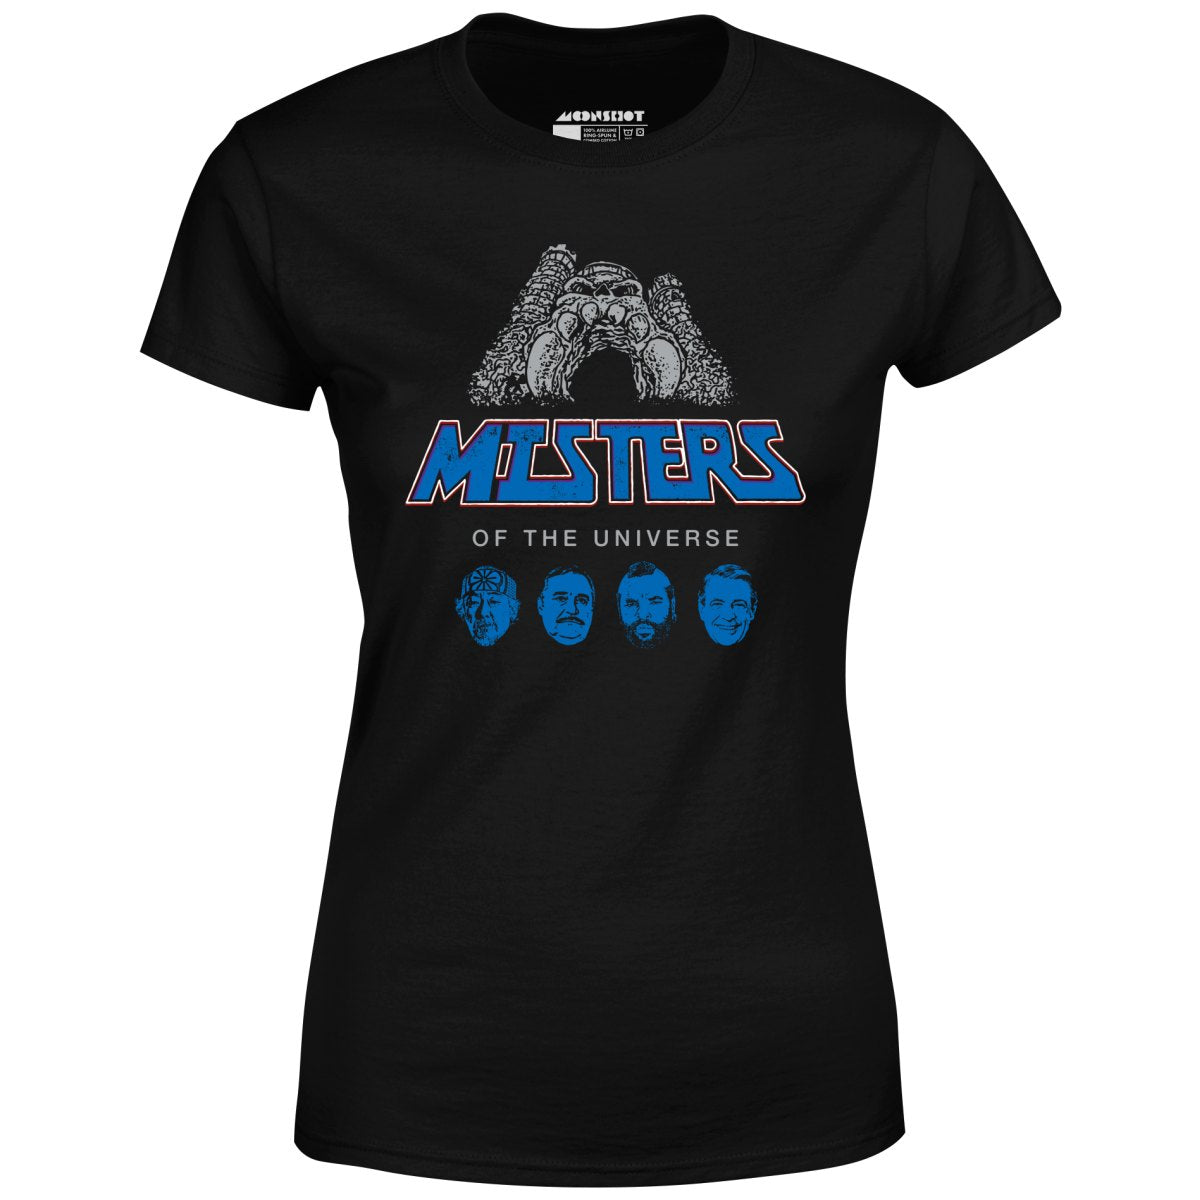 Misters of The Universe - Women's T-Shirt